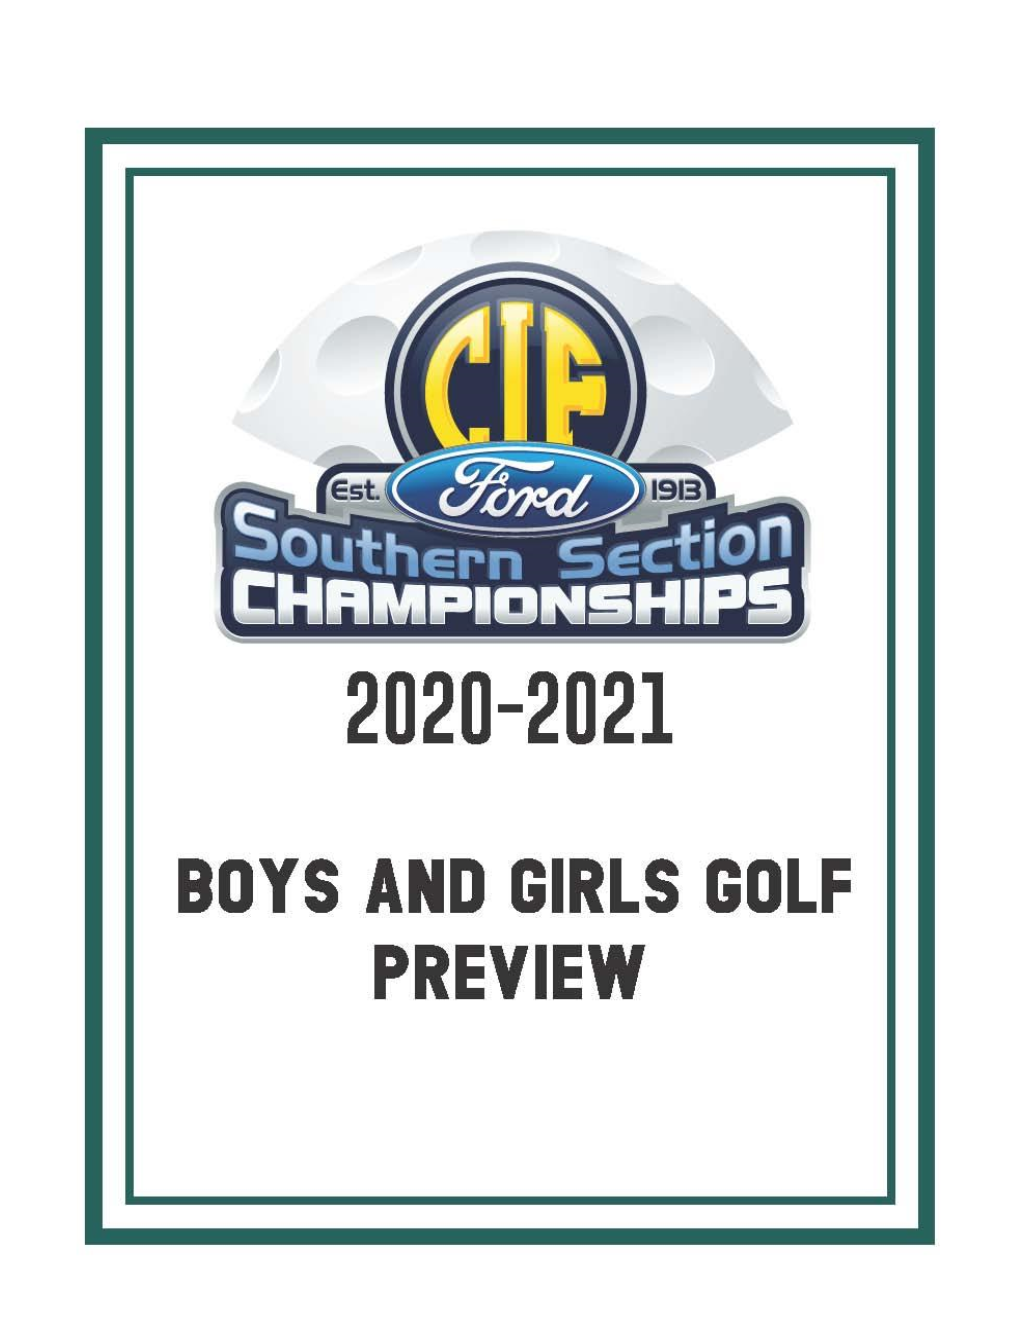 2020-2021 Boys and Girls Golf Season Preview